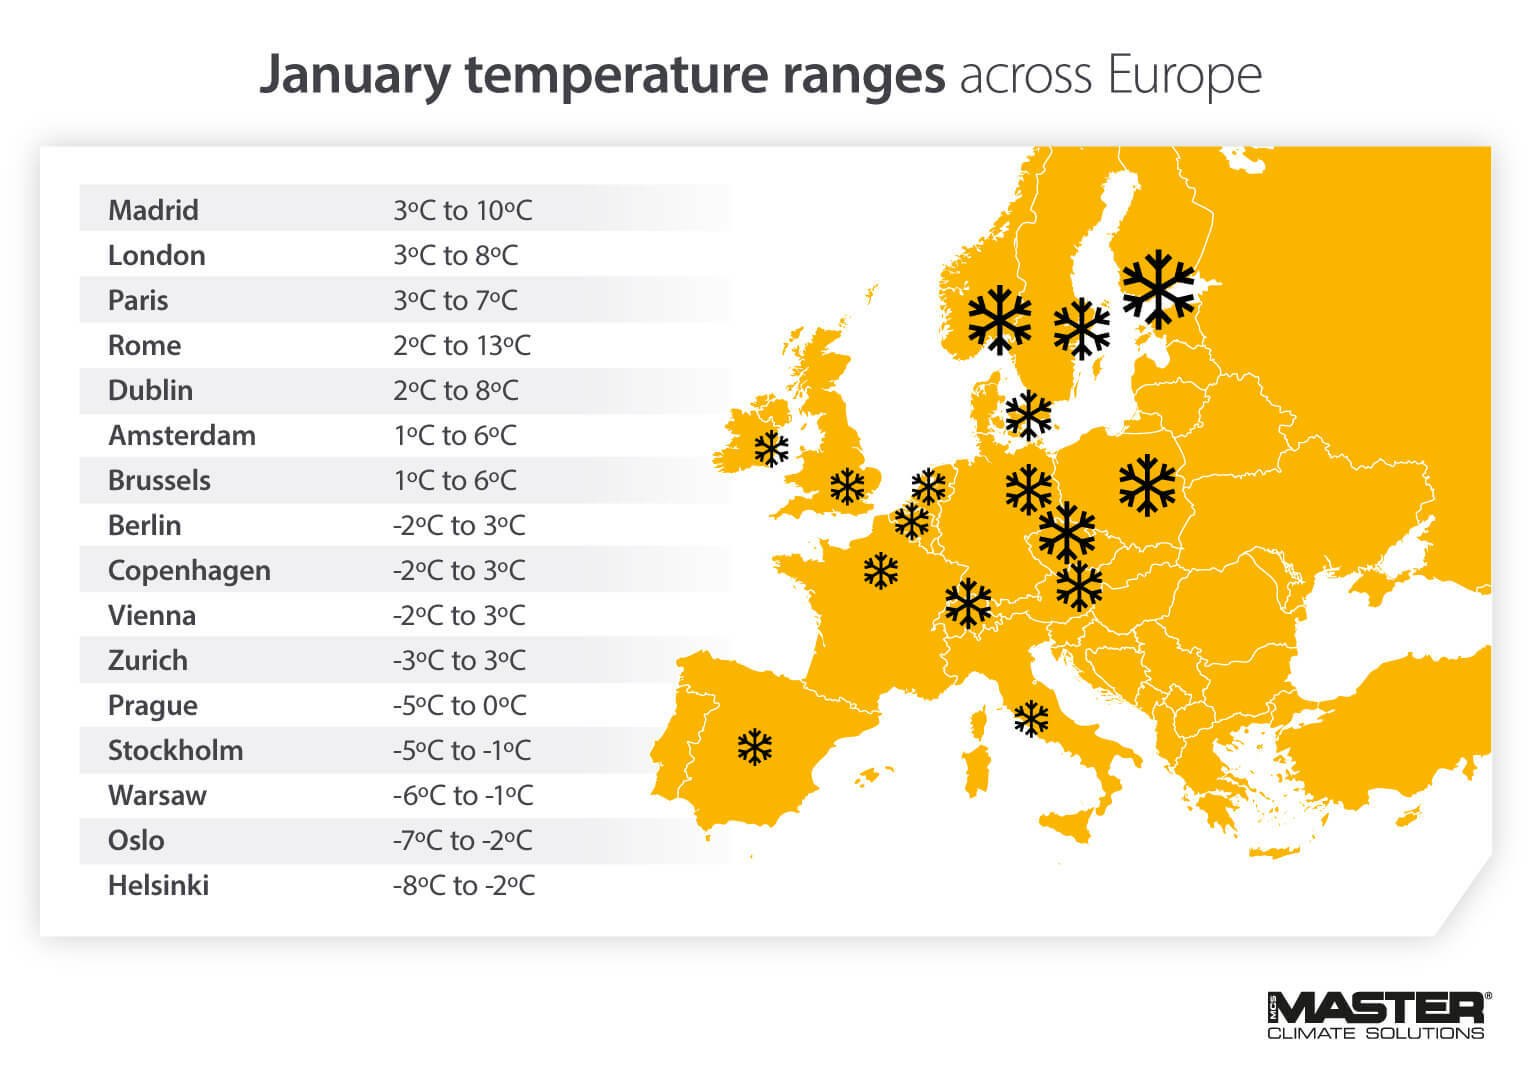 Why it is important to prepare heaters for winter showing January temperatures across Europe - Infographic image